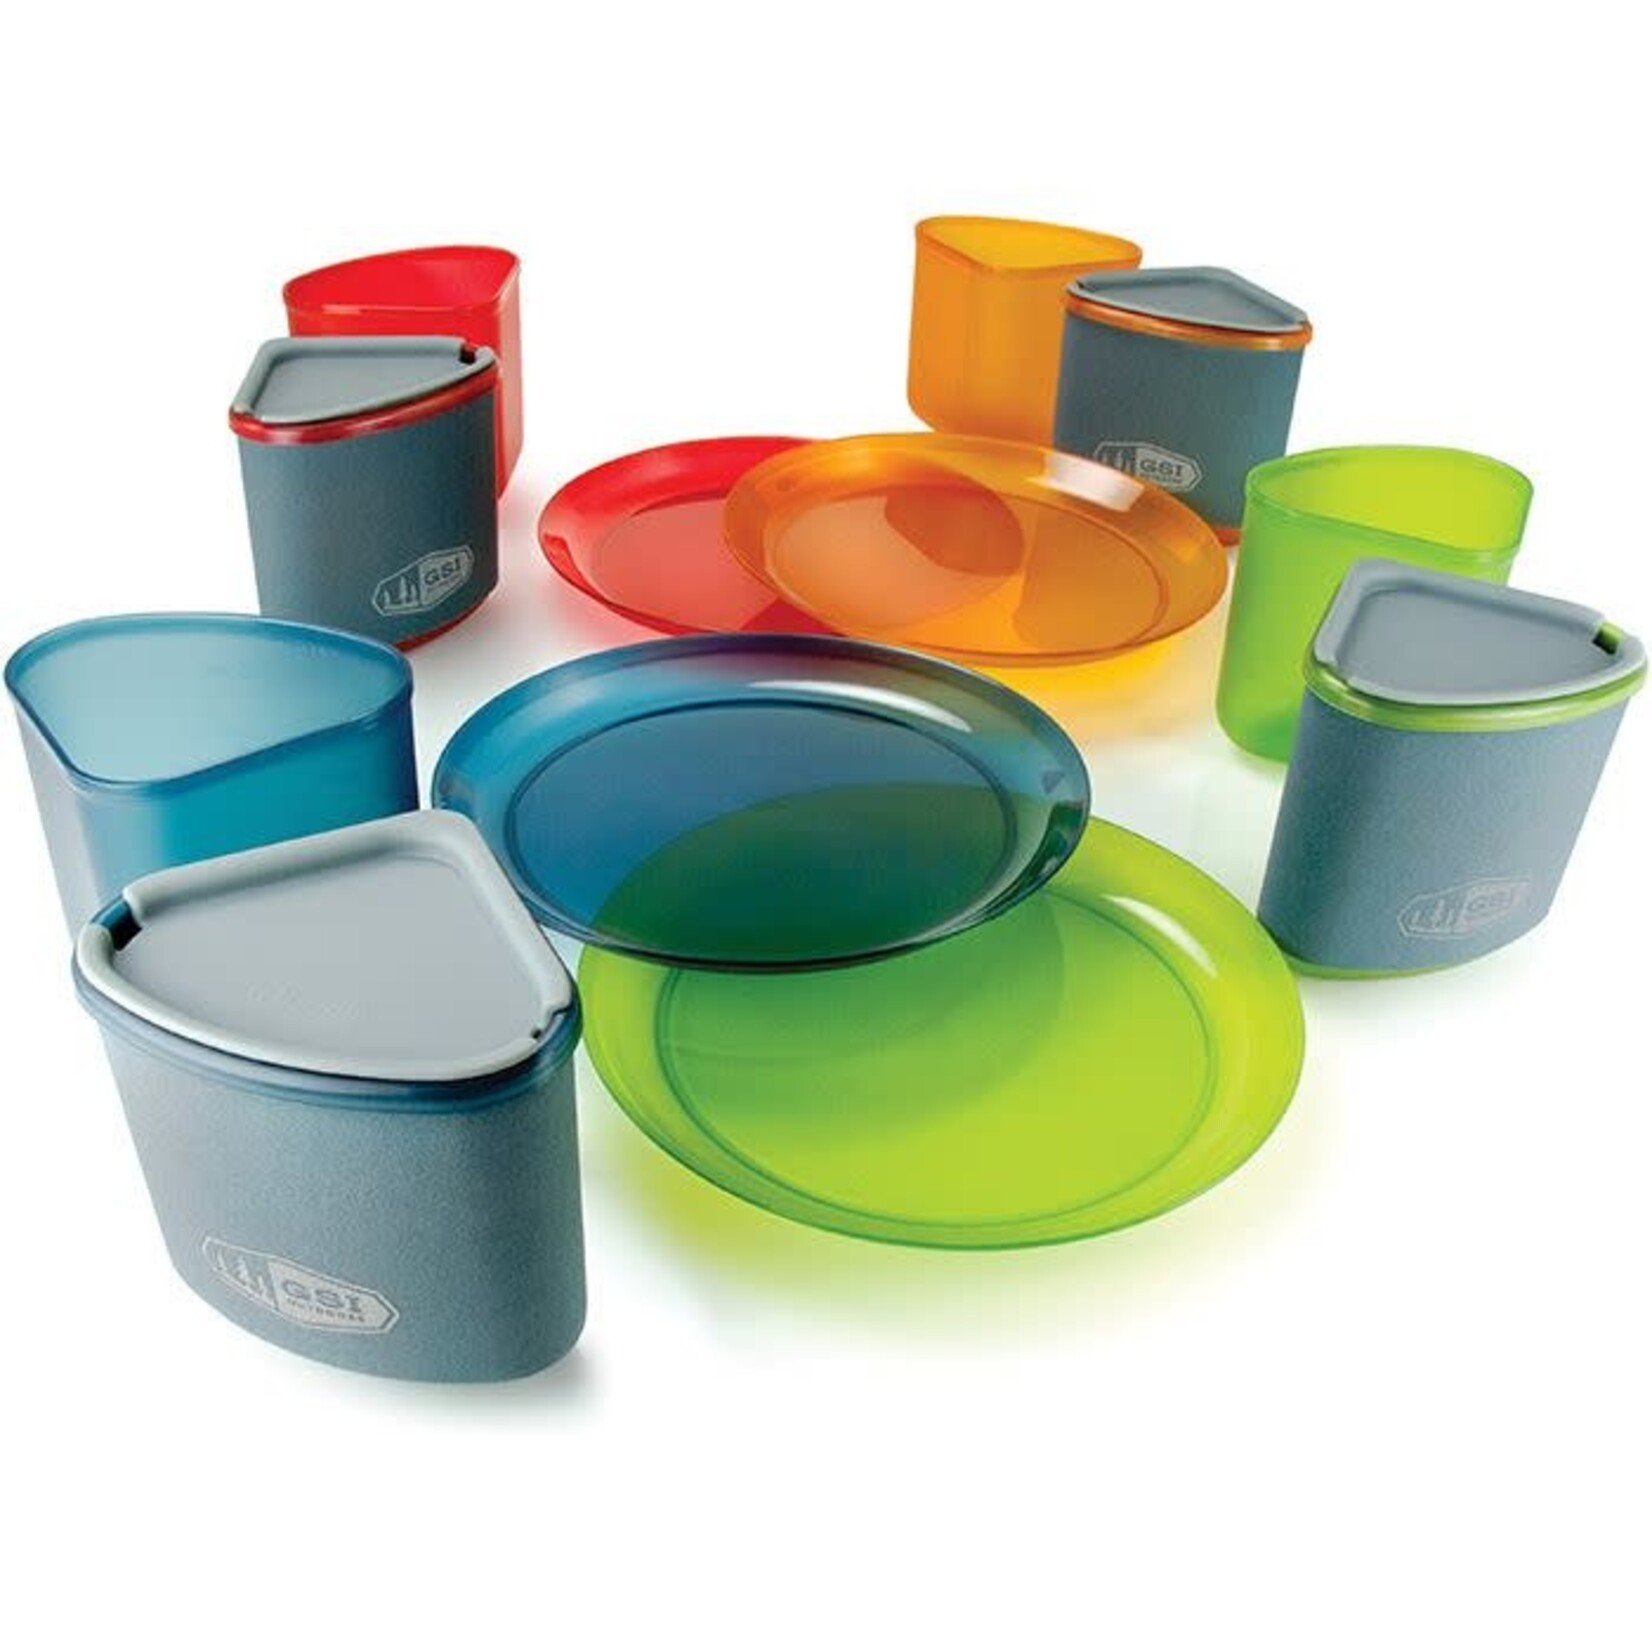 INFINITY 4 PERSON COMPACT TABLESET- MULTICOLOR